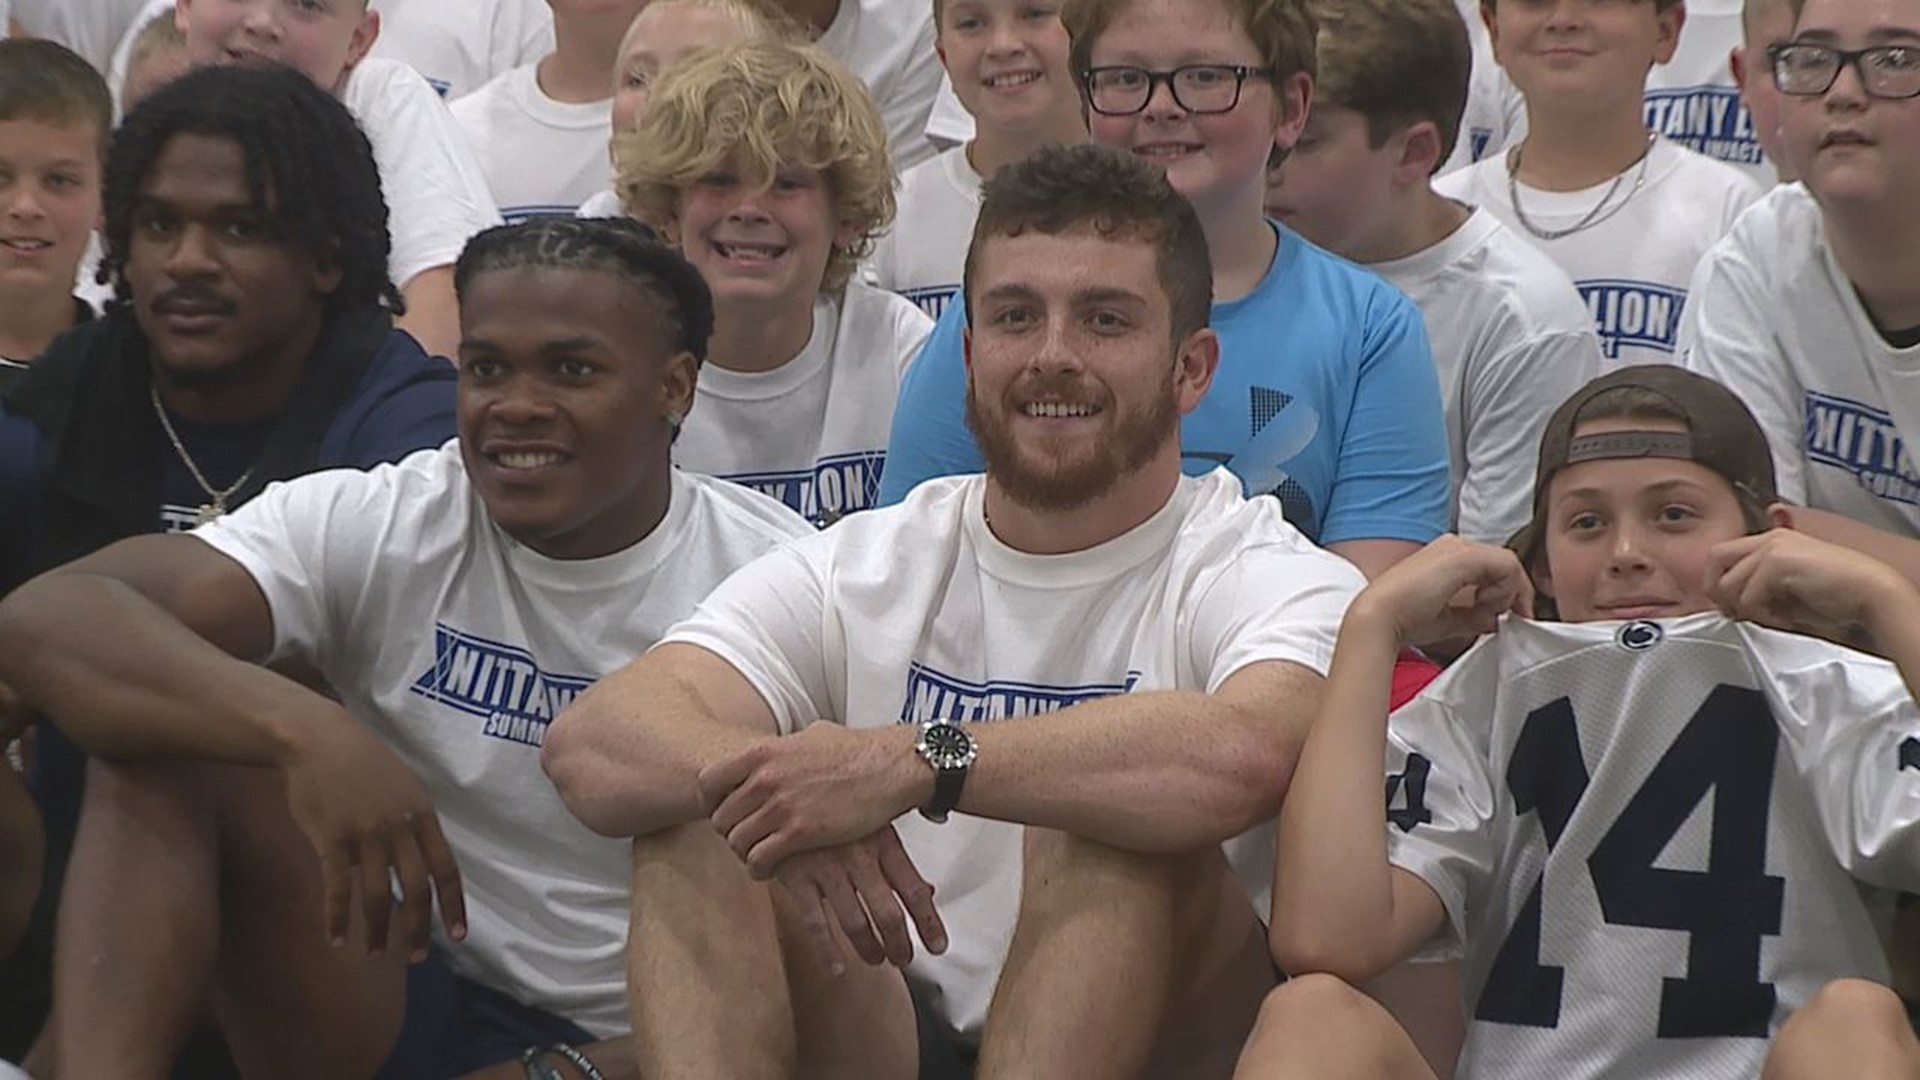 Sean Clifford, along with teammates Dominic DeLuca, Ji'Ayir Brown and others held a youth football camp at Riverfront Sports